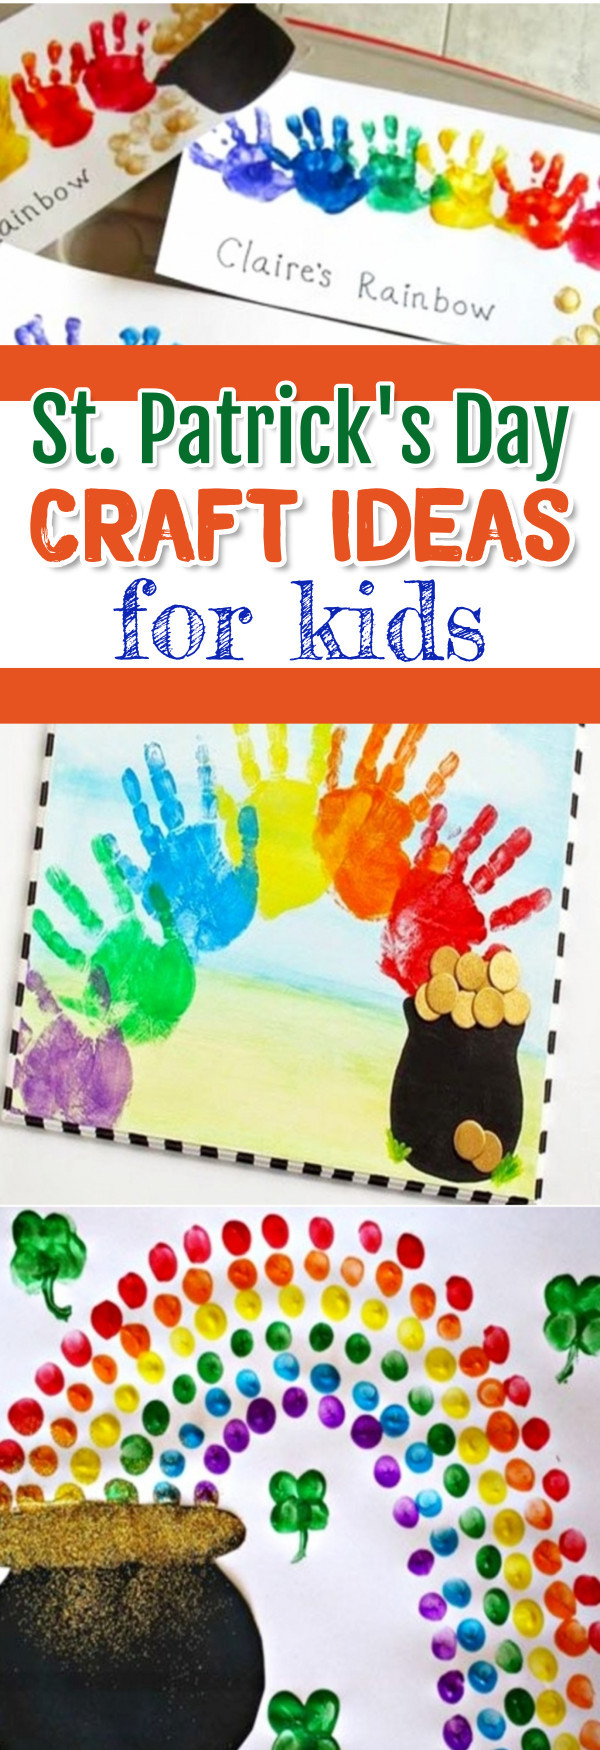 St Patrick's Day Crafts For Toddlers
 35 St Patrick s Day Crafts For Kids Easy St Paddy s Day